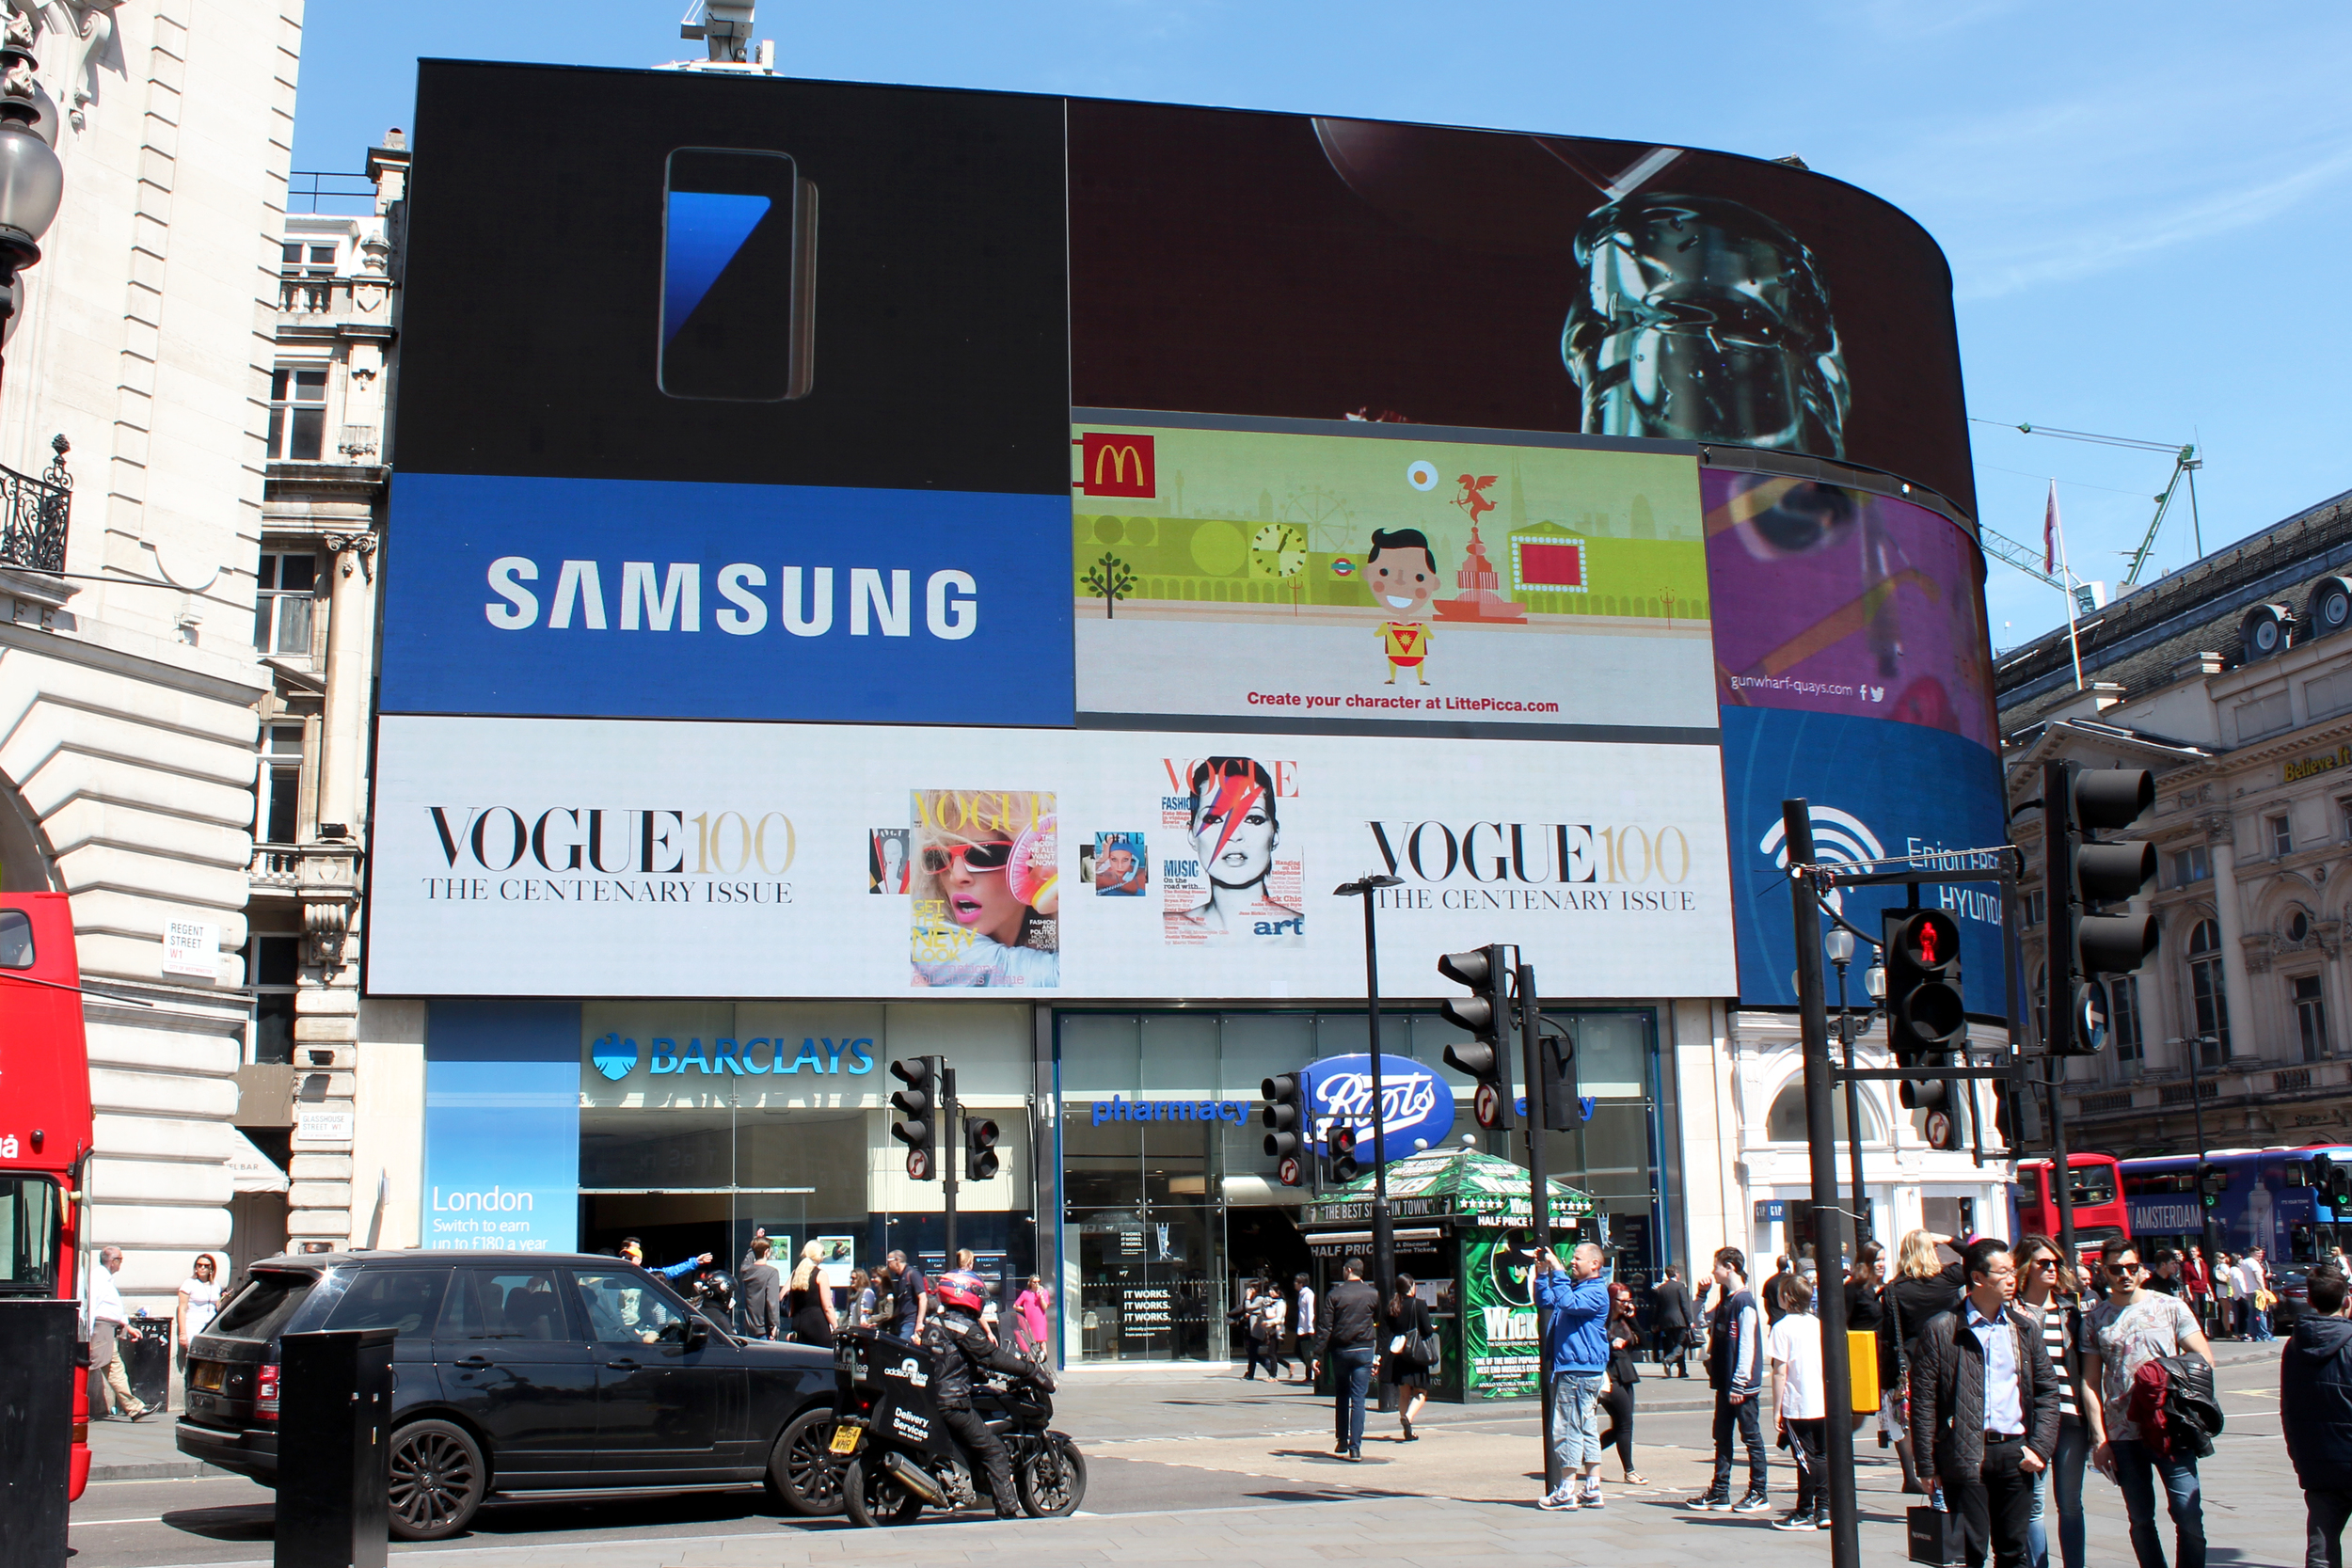 British Vogue - The Centenary Issue, Piccadilly Circus